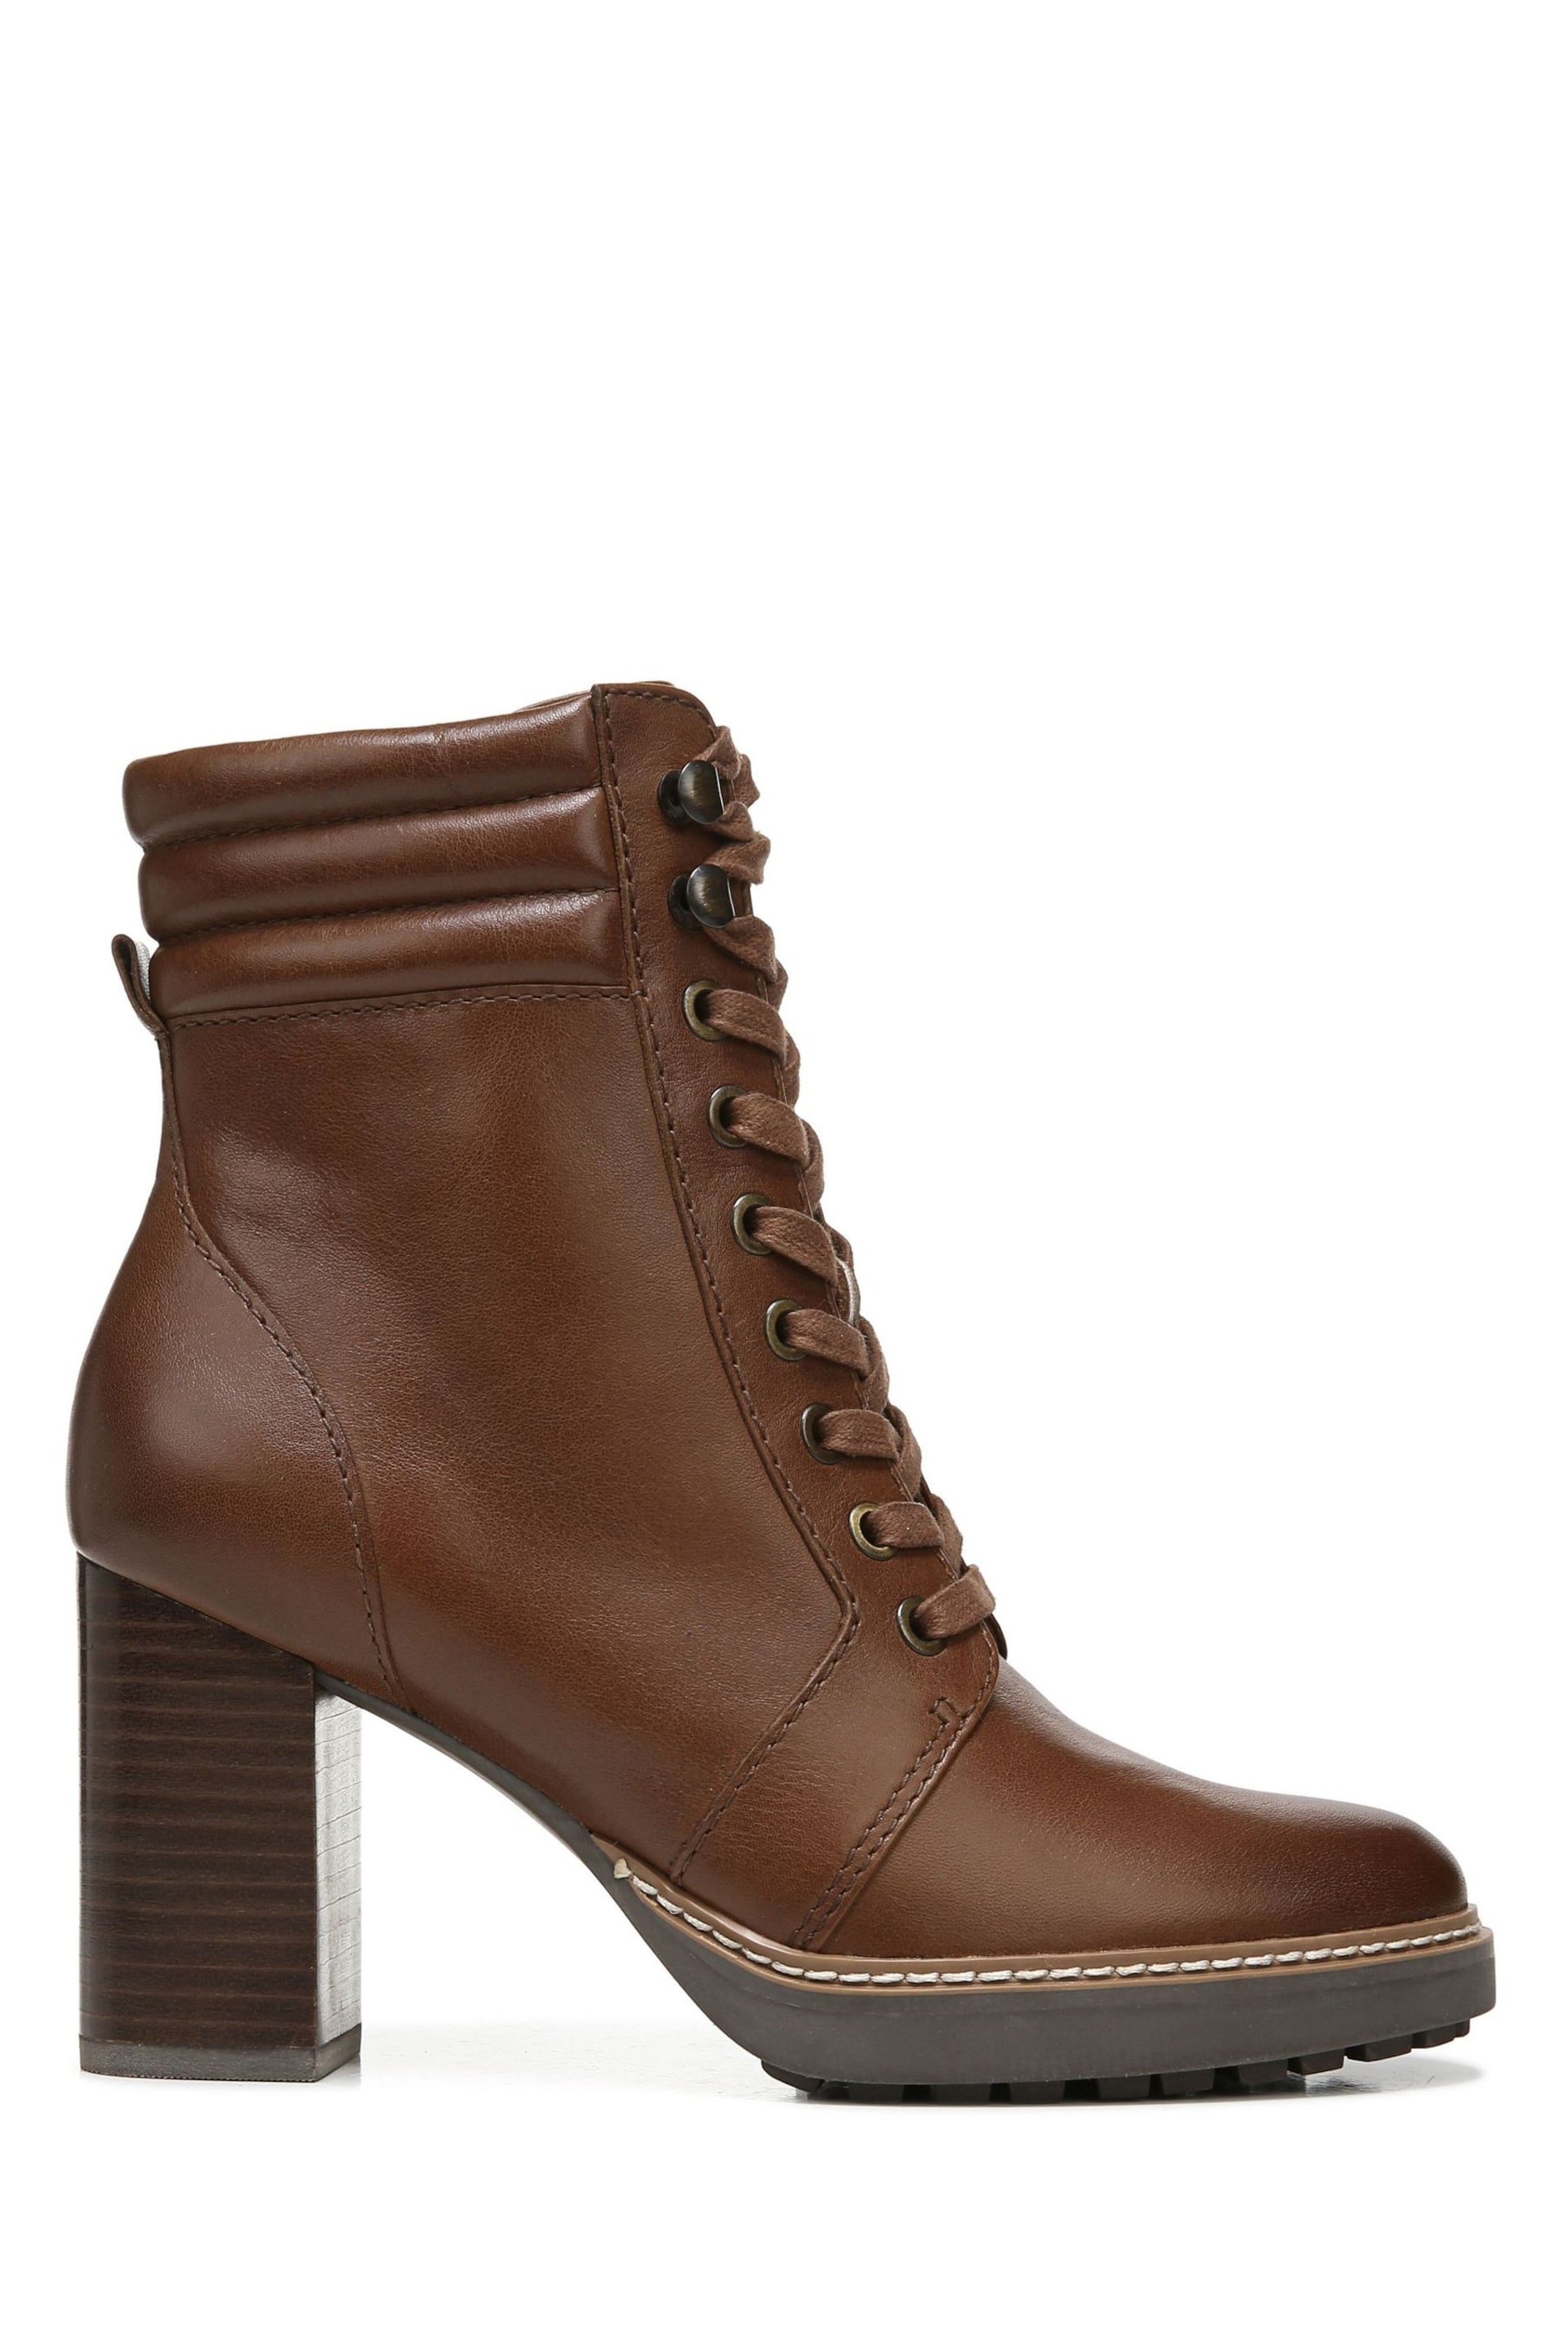 Naturalizer Callie Ankle Leather Boots - Image 1 of 7